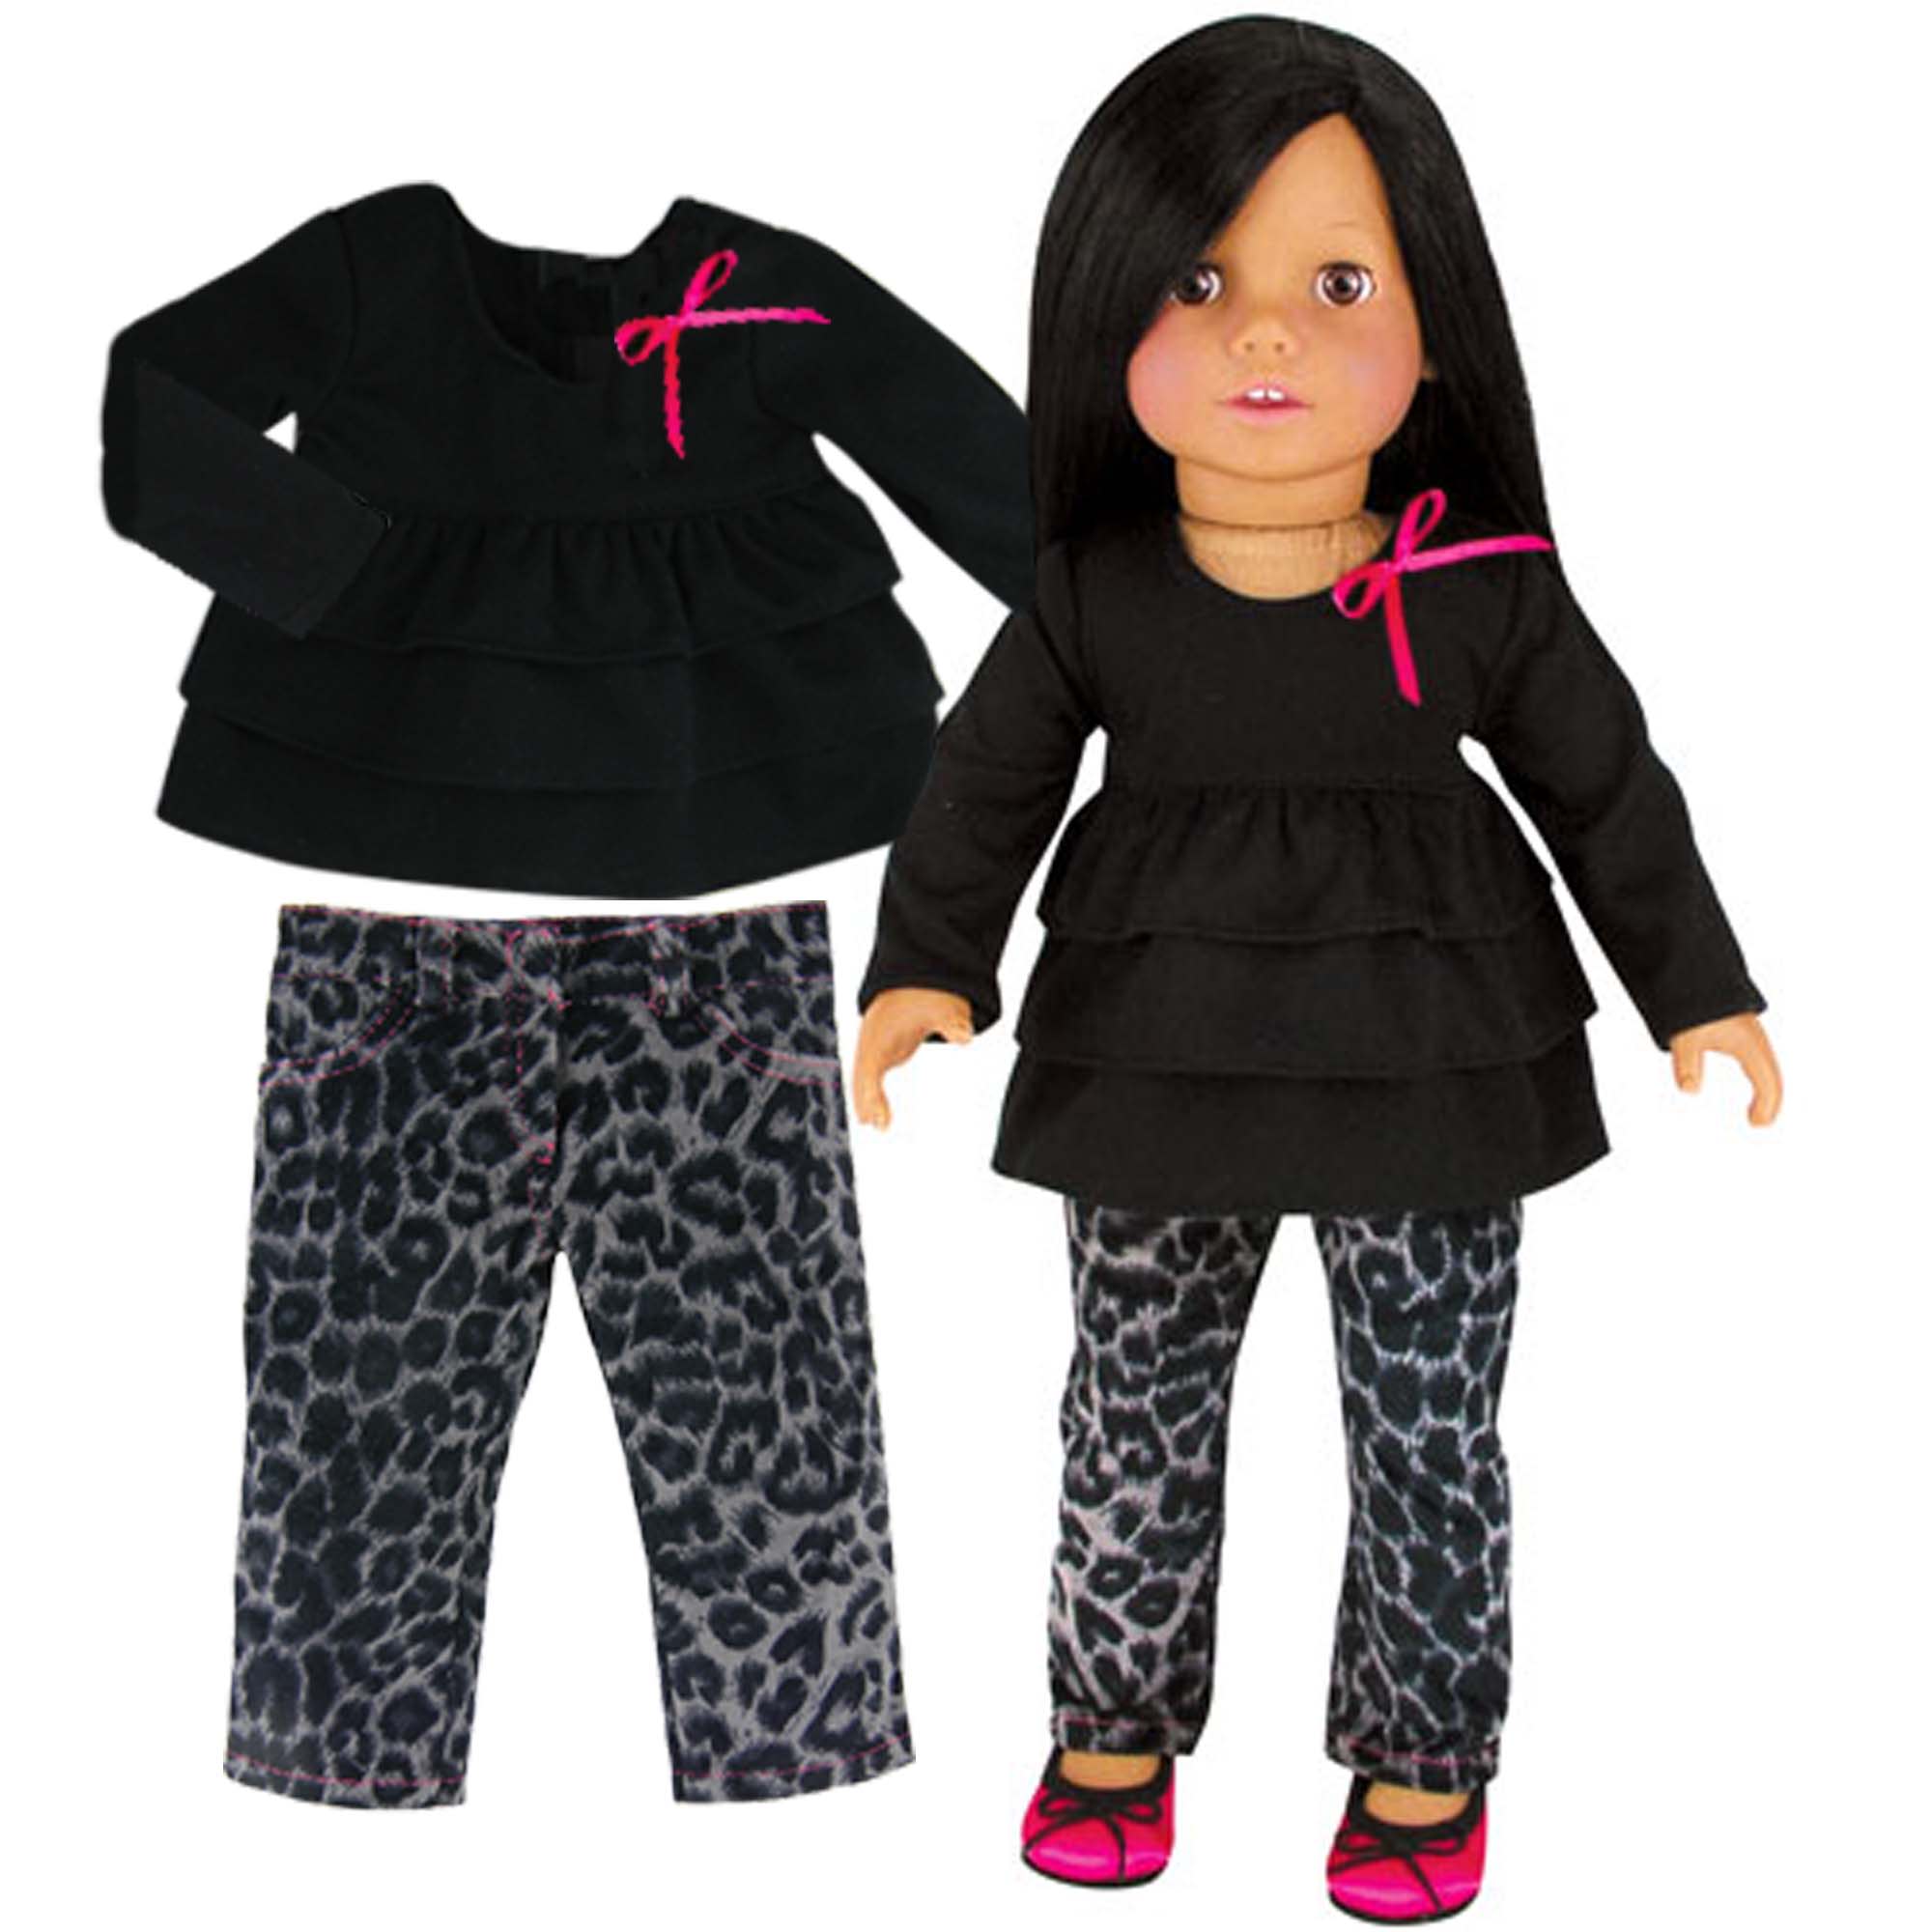 Sophia’s Two-Piece Complete Doll Outfit Set with Leopard Animal Print Jeans & Long Sleeve Ruffle Peplum-Style Tee Shirt for 18” Dolls, Black